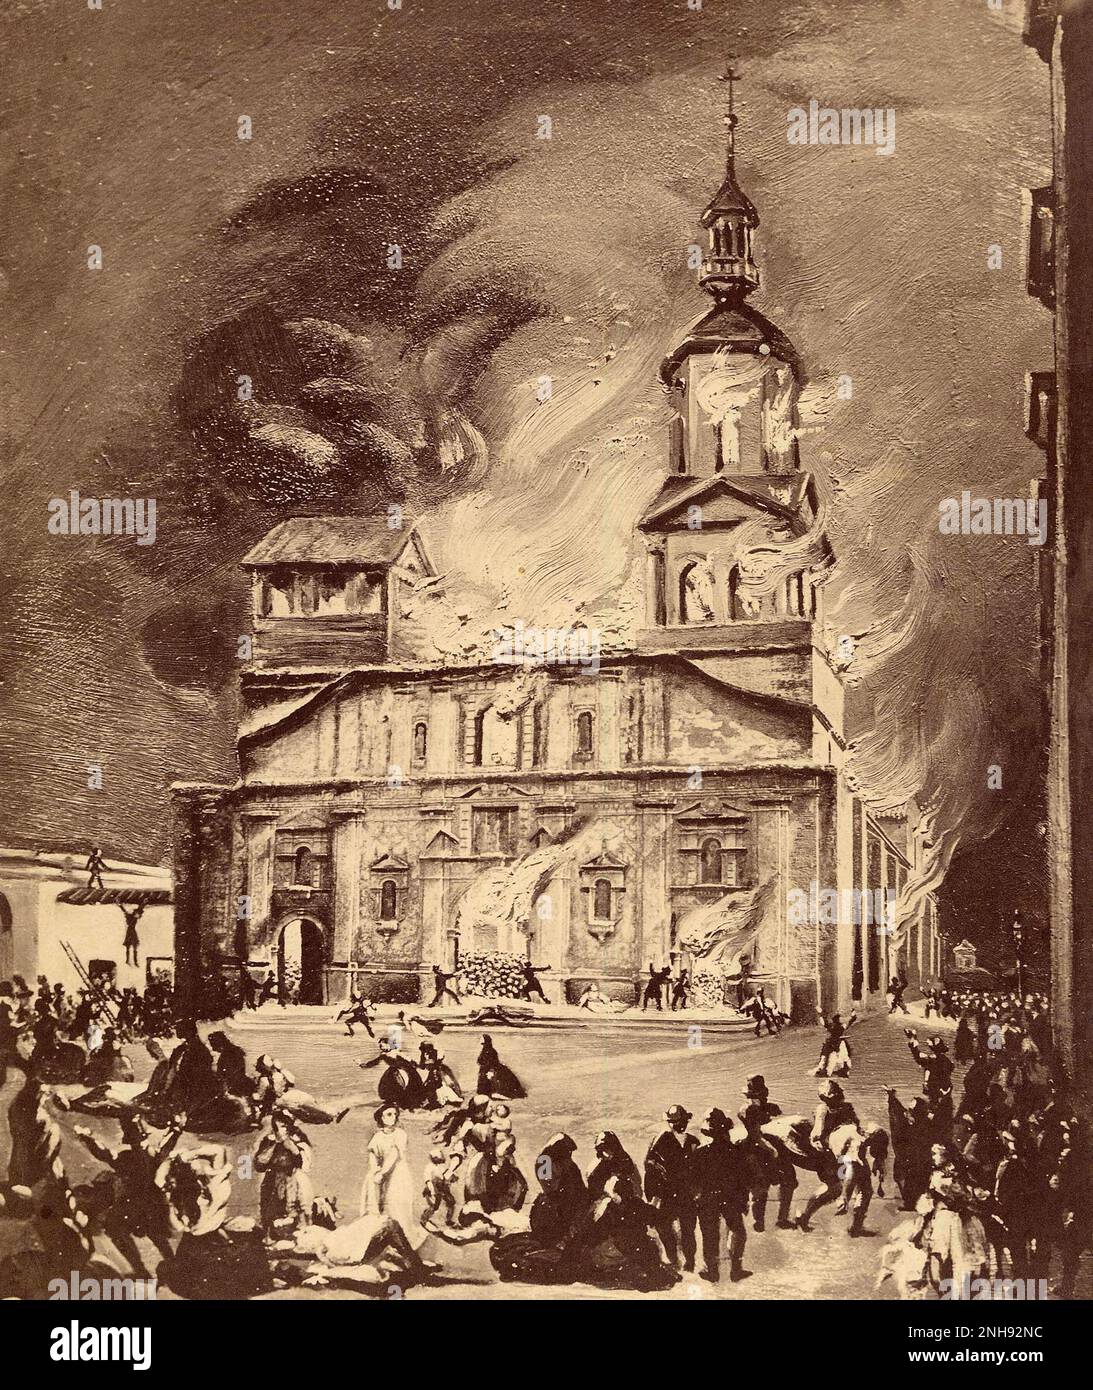 The Church of the Society fire on the 8th of December, 1863, in Santiago, Chile. Between 2,000 and 3,000 people were trapped inside the church and died, one of the largest and most fatal accidental building fires in history. Stock Photo